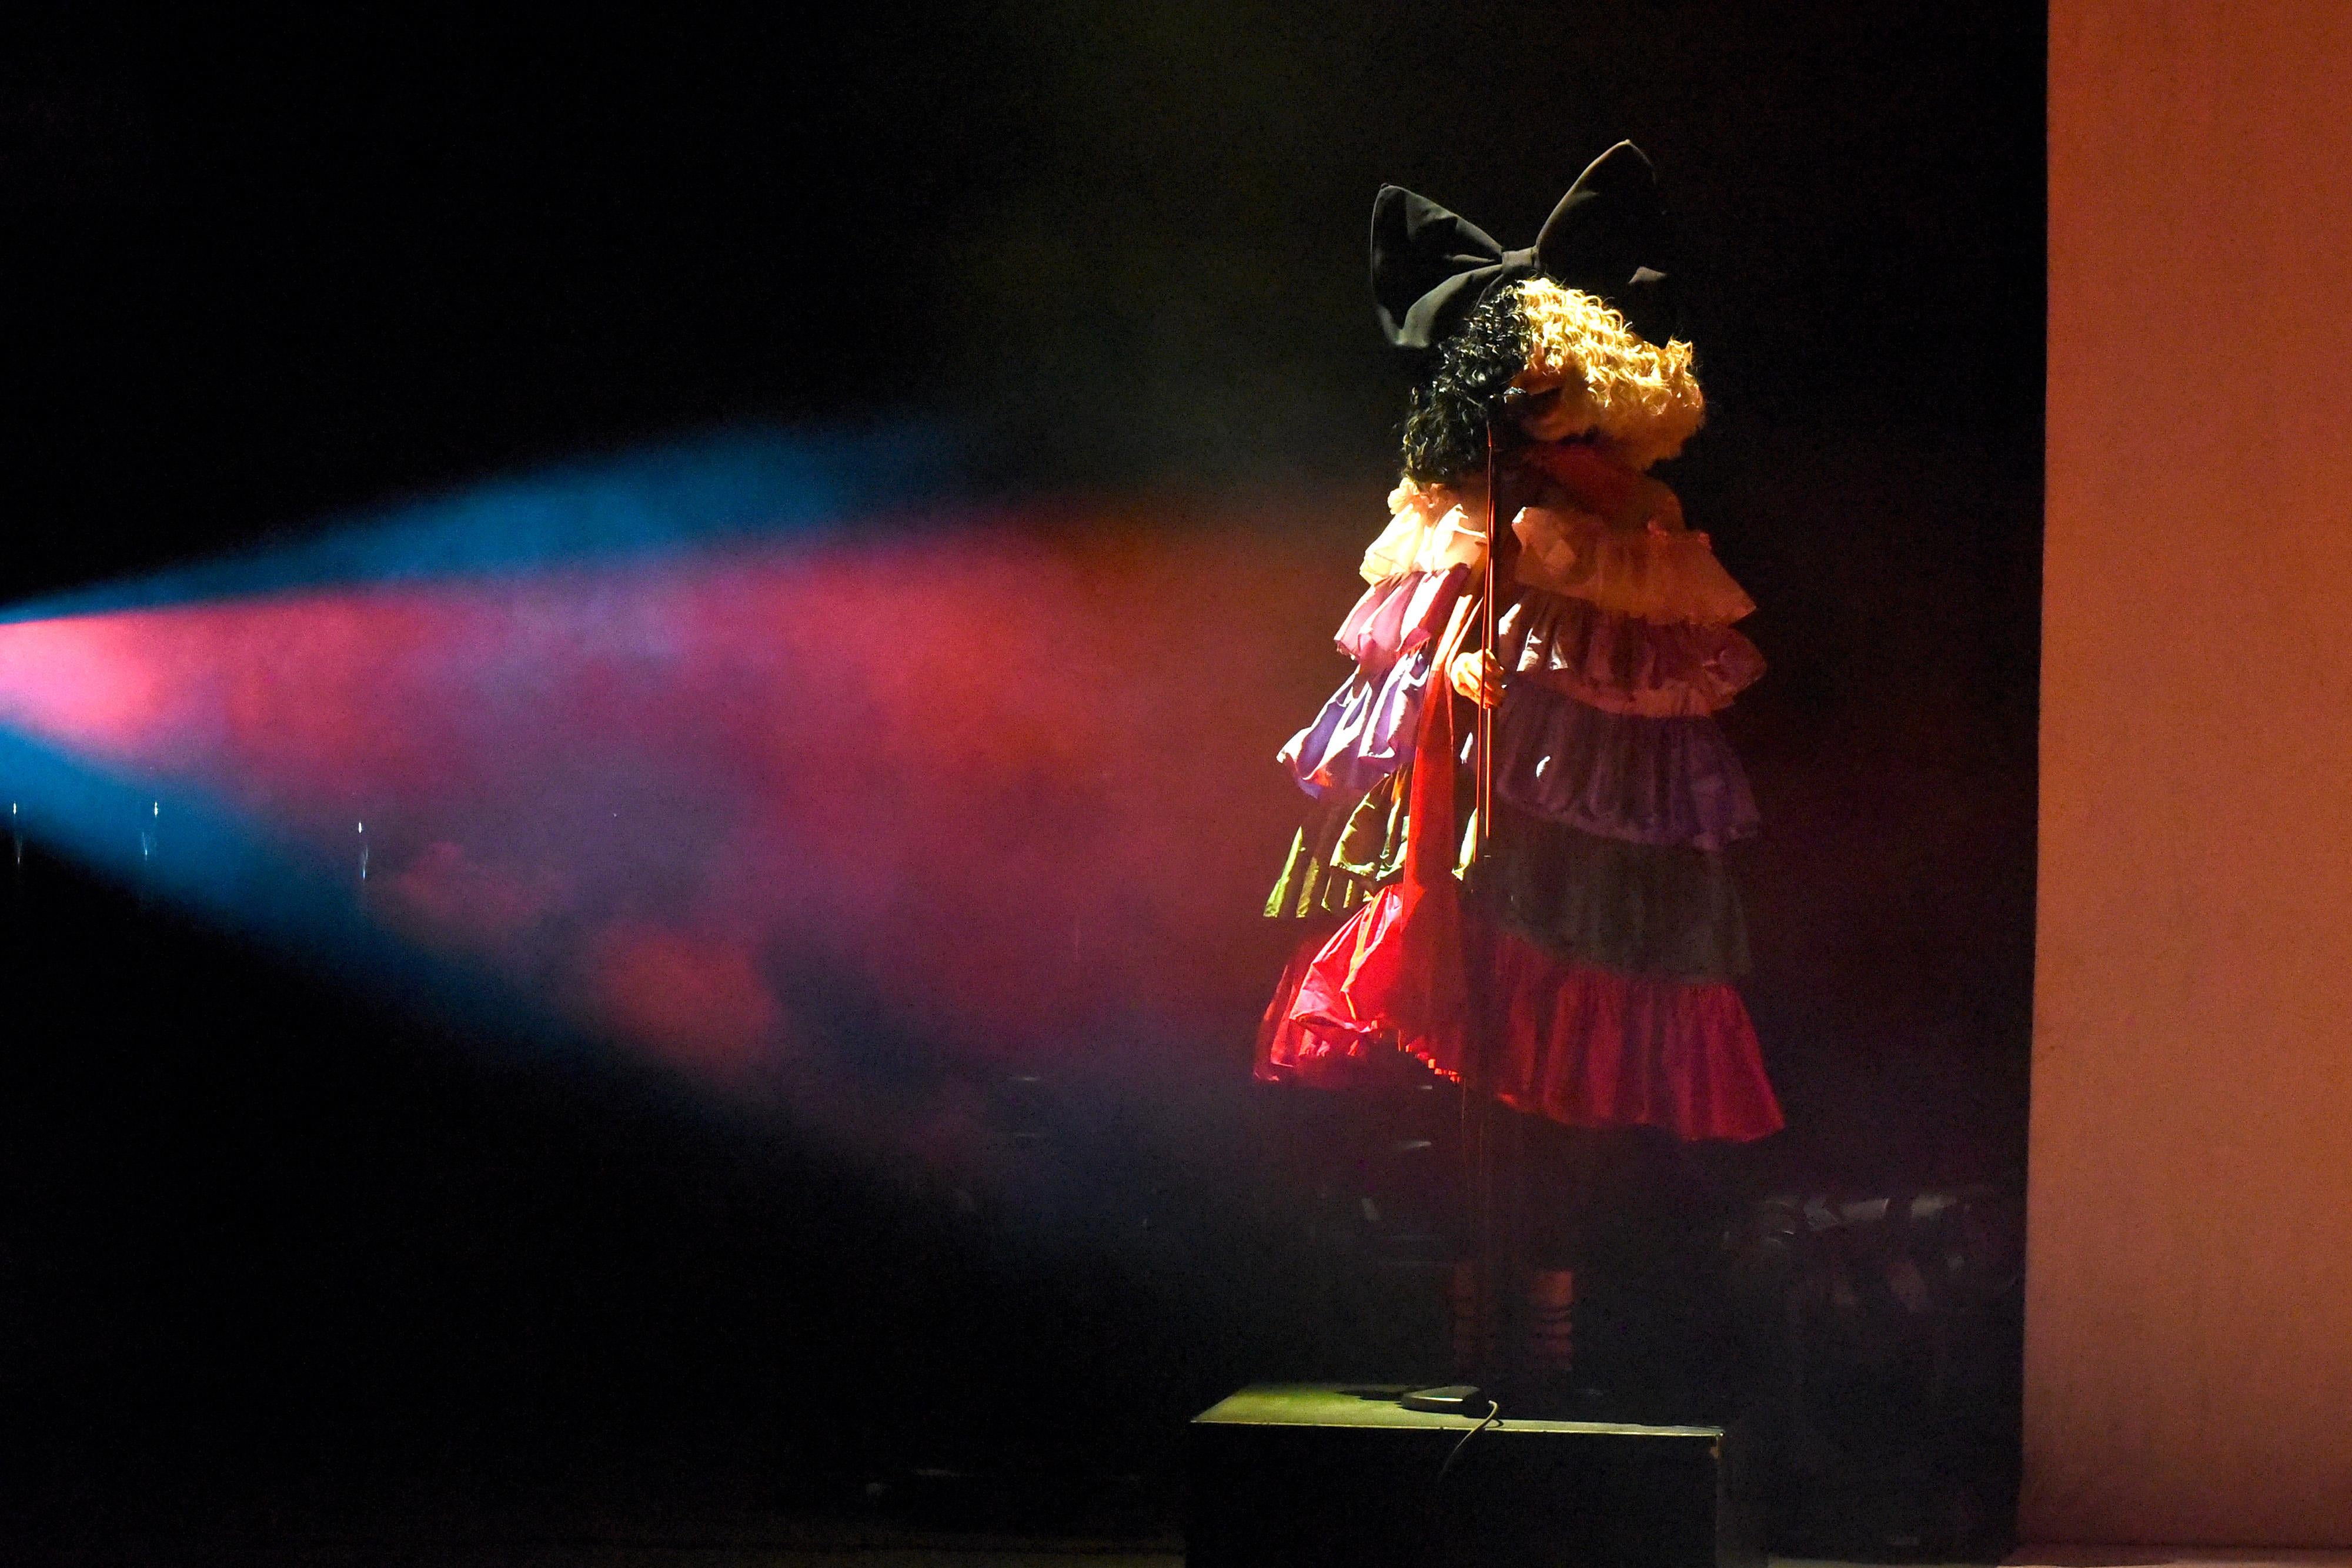 Sia, wearing a multilayered ruffled dress and a large black-and-white wig that covers her entire face, stands alone on a stage.